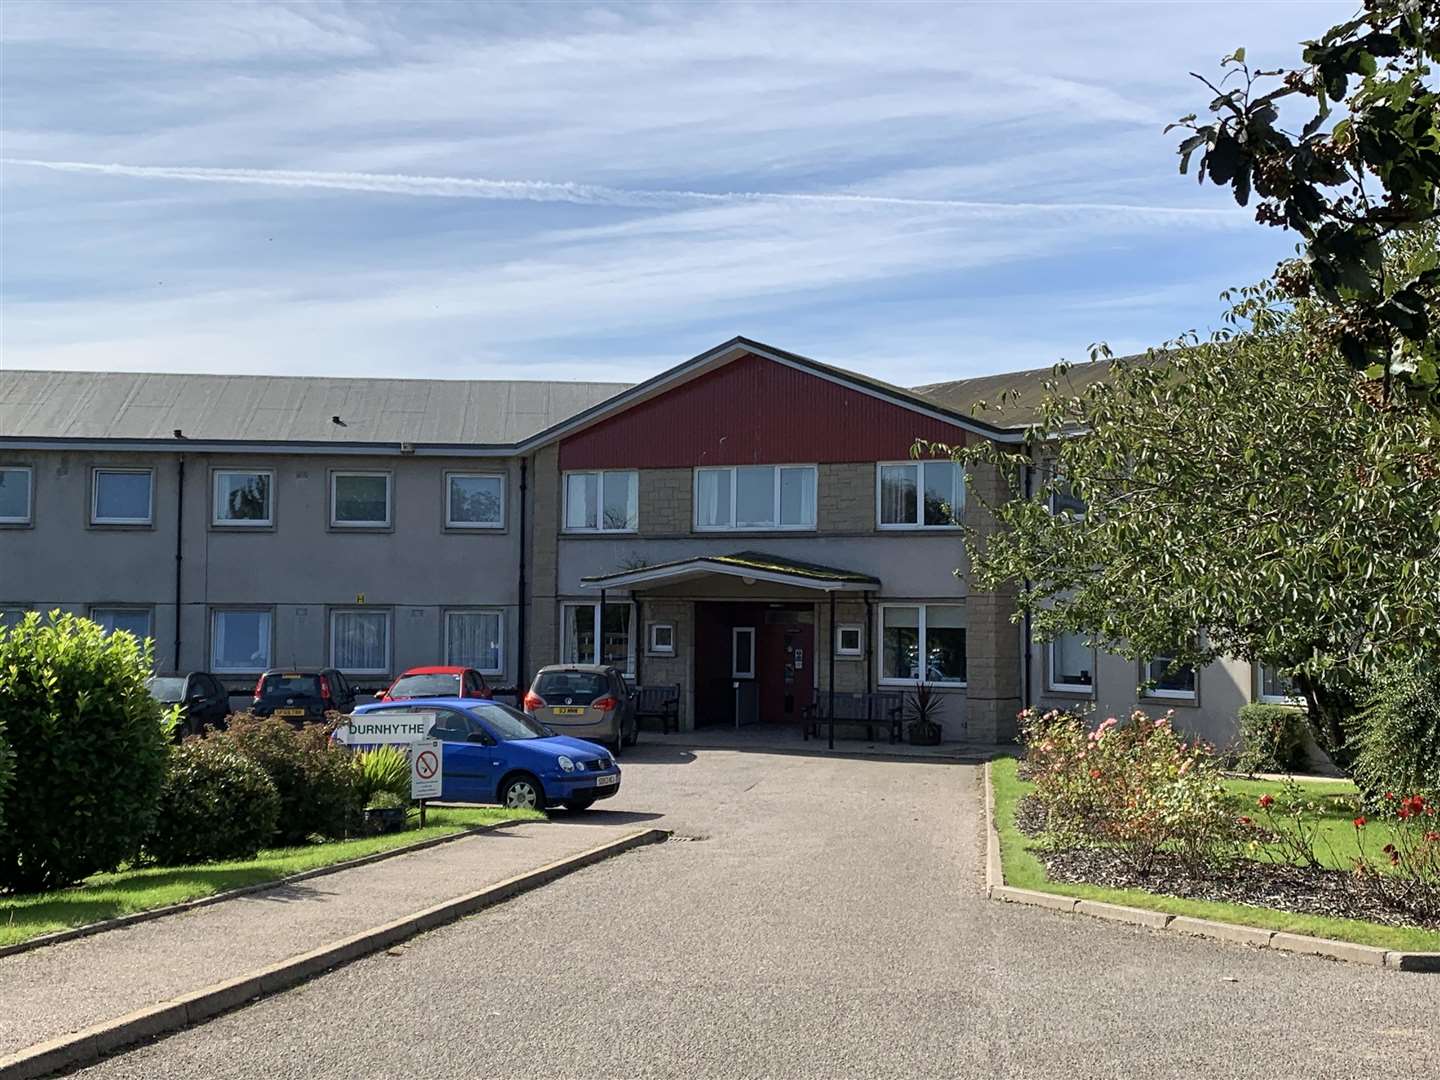 Concerns were raised by inspectors after they visited Durnhythe Care Home in Portsoy.